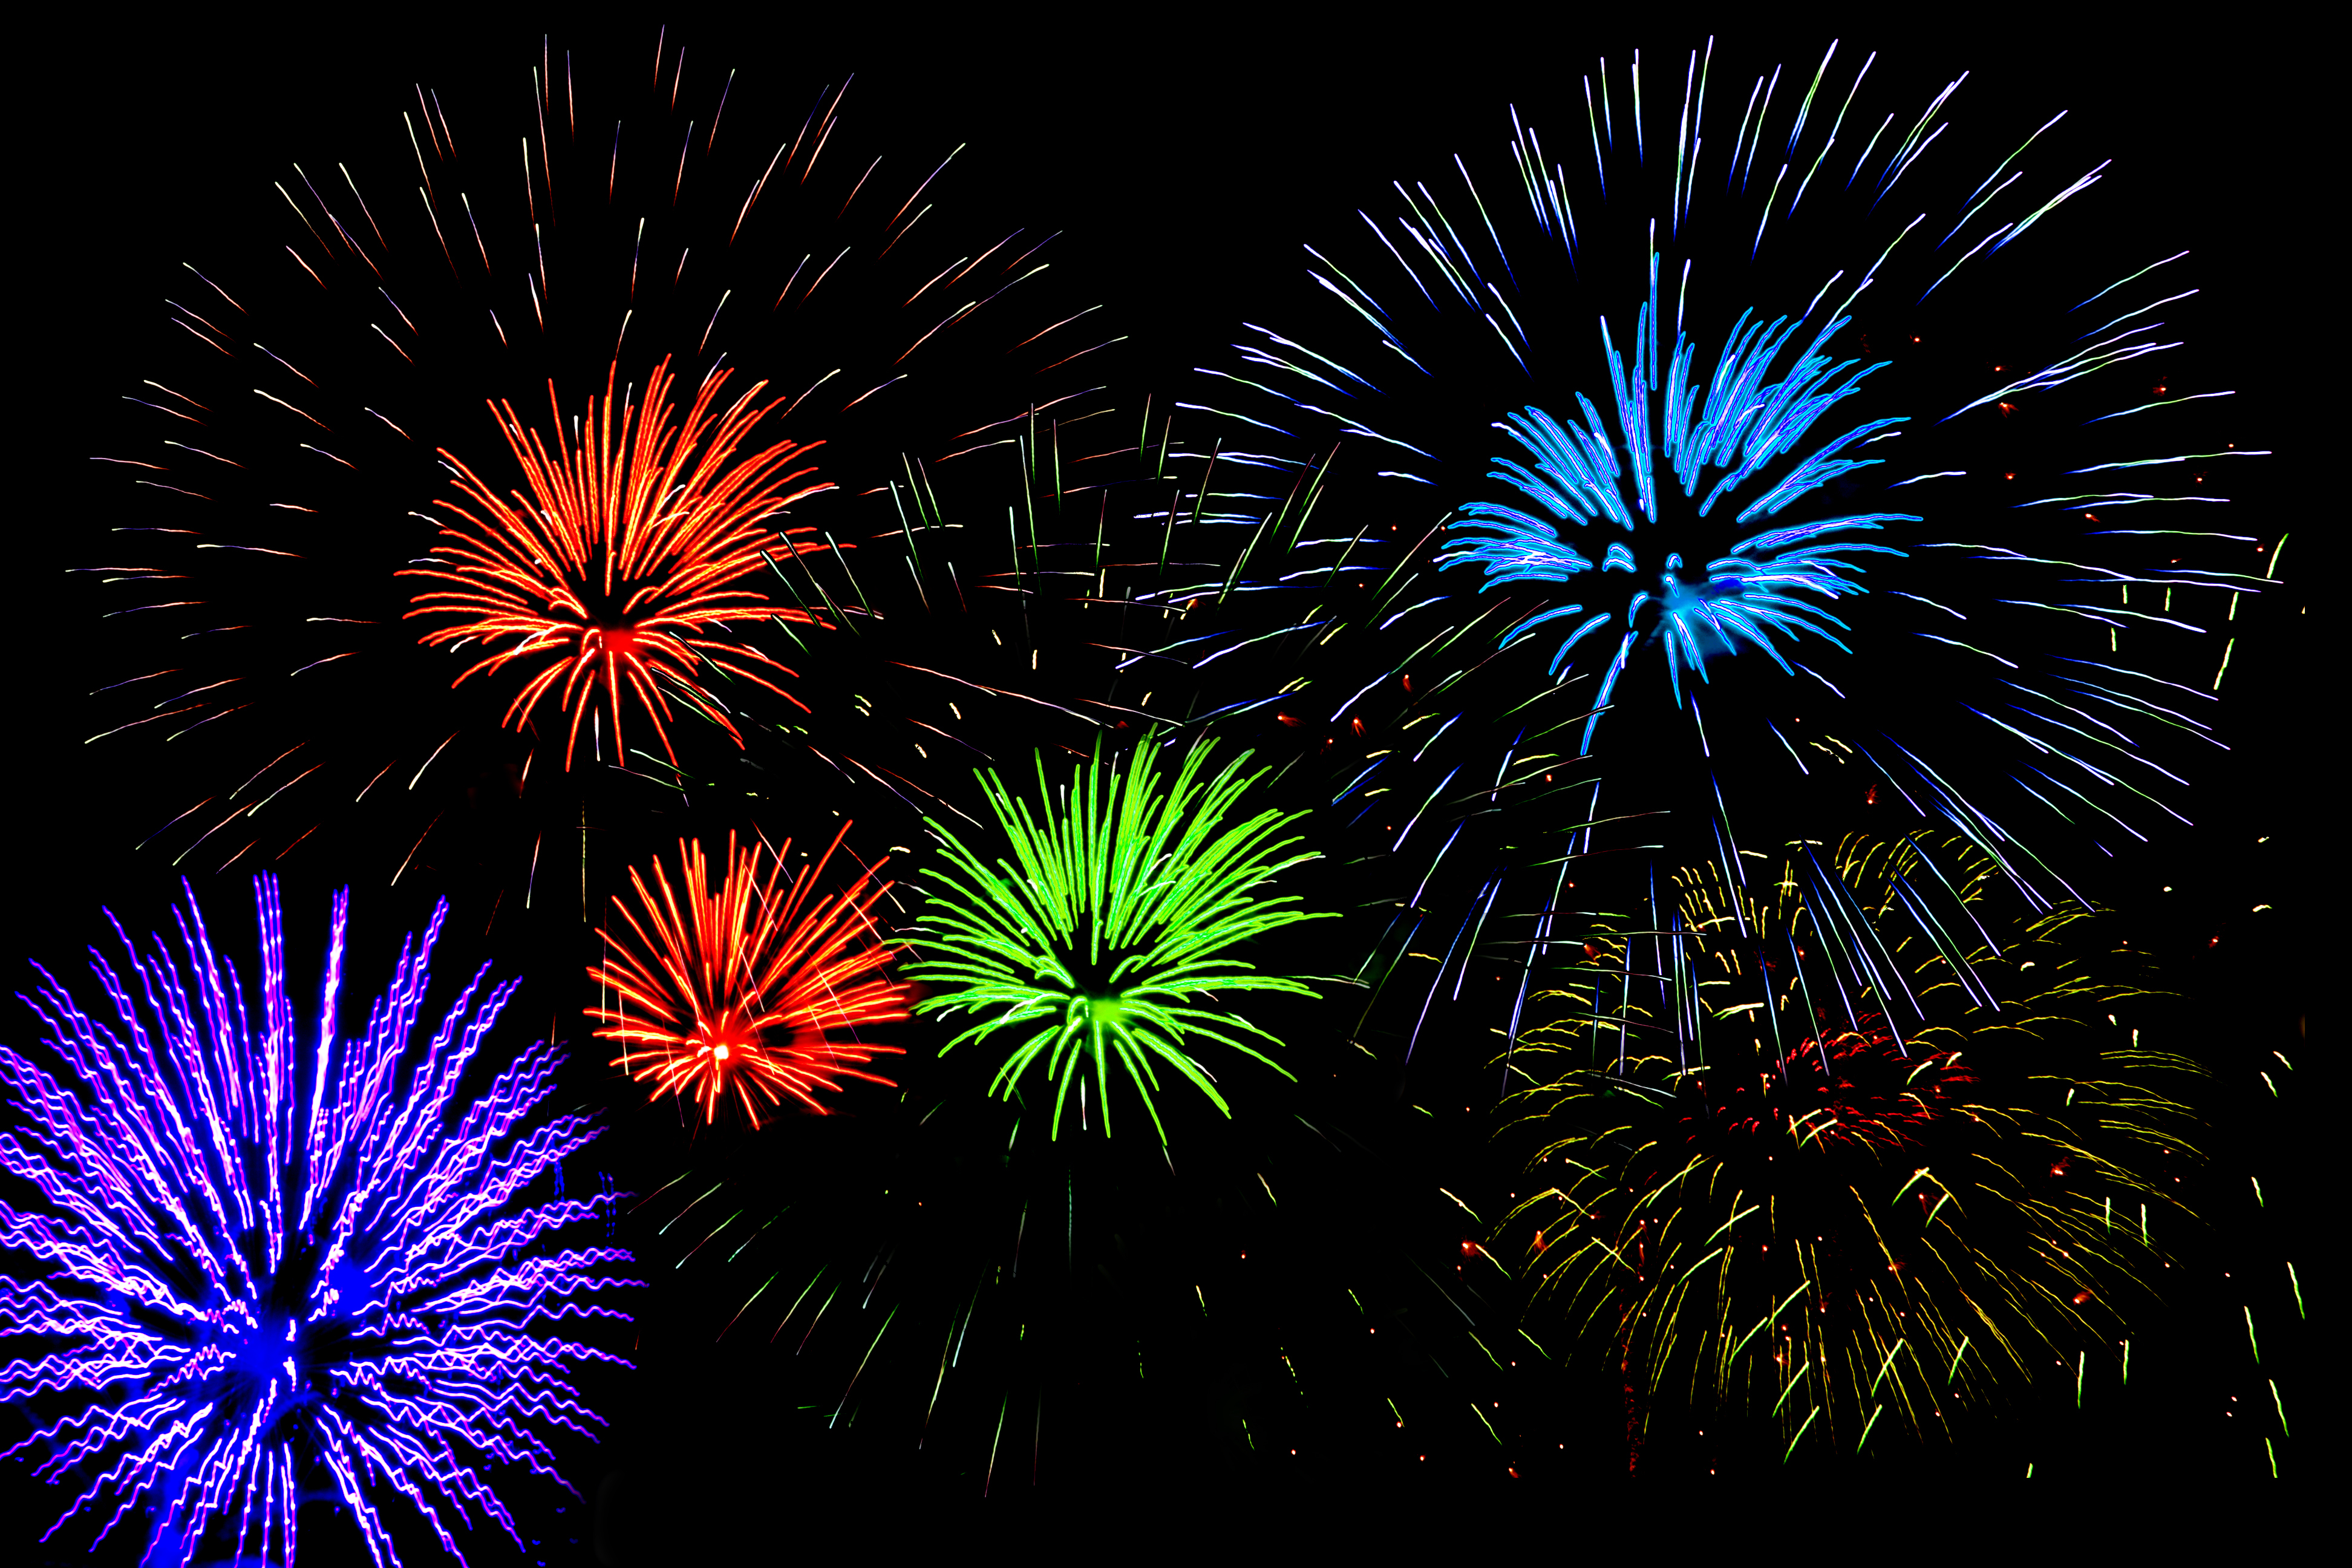 http://www.dreamstime.com/royalty-free-stock-photos-fireworks ...